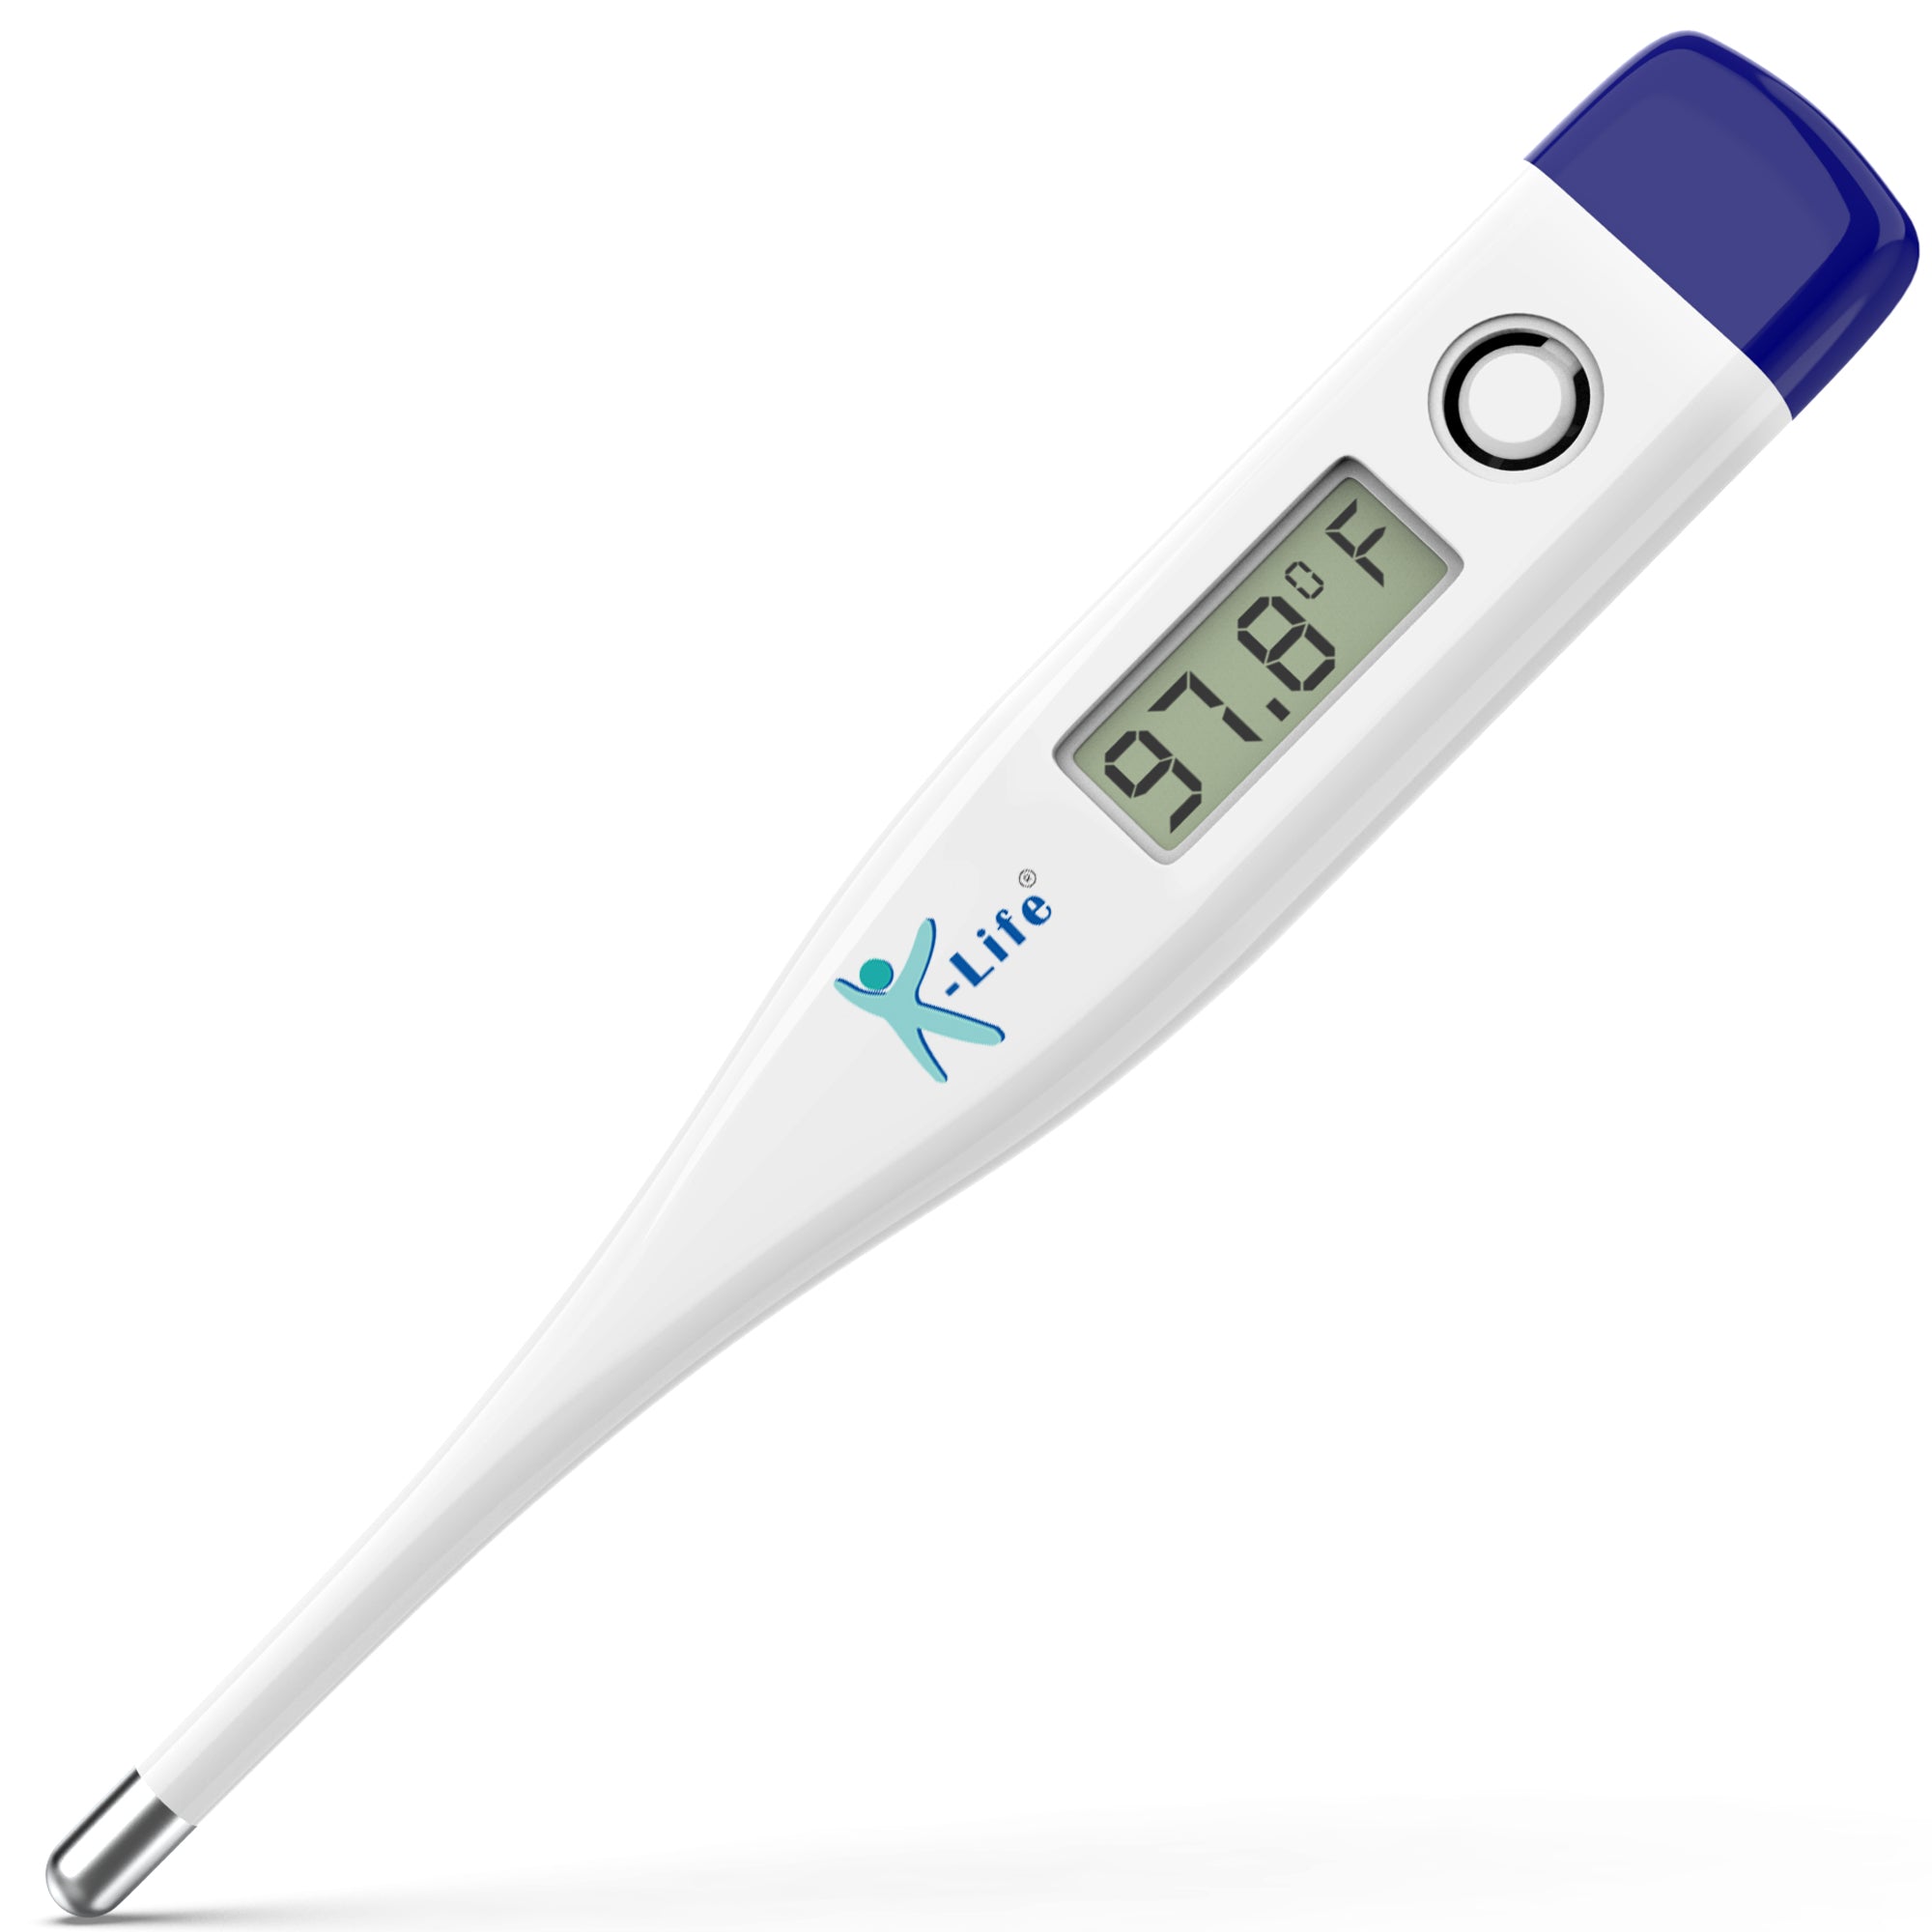 K-life DT-01 Digital Body Fever check Machine for Testing Kids Adults & Babies Temperature Thermometer